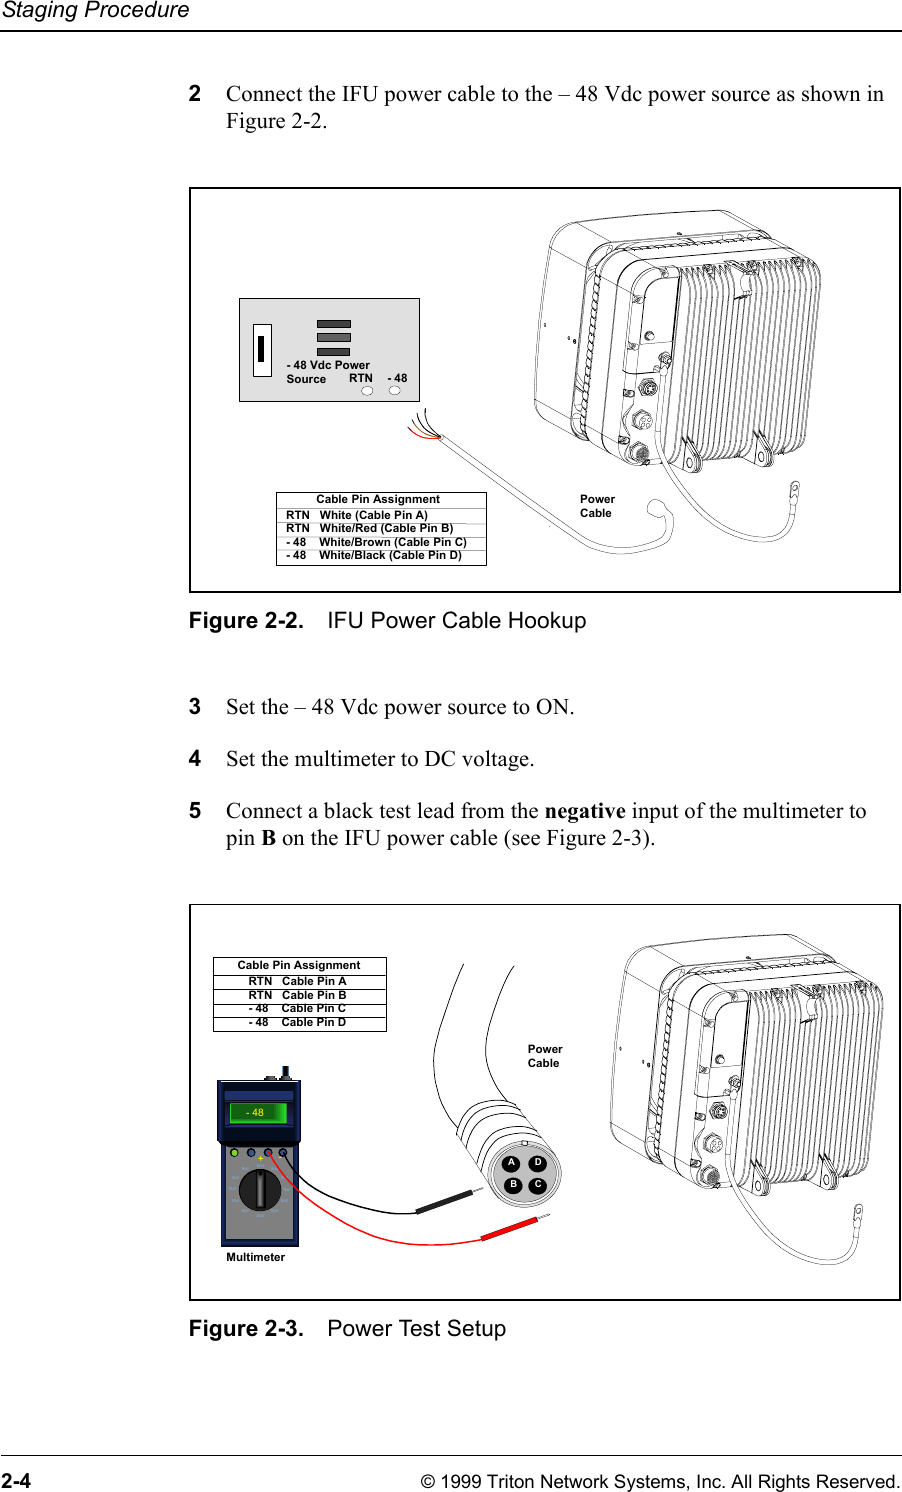 Staging Procedure2-4 © 1999 Triton Network Systems, Inc. All Rights Reserved.2Connect the IFU power cable to the – 48 Vdc power source as shown in Figure 2-2.Figure 2-2. IFU Power Cable Hookup3Set the – 48 Vdc power source to ON. 4Set the multimeter to DC voltage.5Connect a black test lead from the negative input of the multimeter to pin B on the IFU power cable (see Figure 2-3).Figure 2-3. Power Test SetupPower Cable- 48 Vdc PowerSource - 48RTNRTN   White (Cable Pin A)RTN   White/Red (Cable Pin B)- 48    White/Brown (Cable Pin C)- 48    White/Black (Cable Pin D)Cable Pin AssignmentTEXTTEXTTEXT TEXTTEXT TEXTTE XT TE XTTE XT TE XTTEXTTEXT- 48+- MultimeterRTN   Cable Pin ARTN   Cable Pin B- 48    Cable Pin C- 48    Cable Pin DCable Pin AssignmentAPower CableDBC